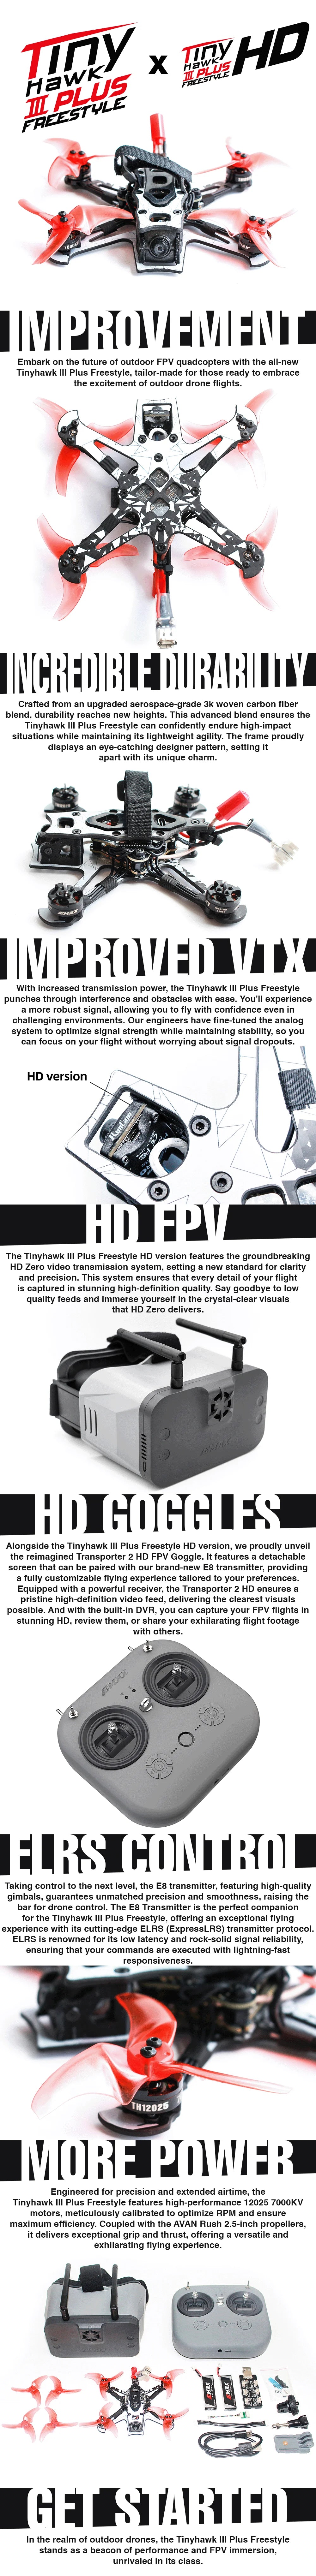 Emax Tinyhawk III Plus, the all-new Tinvhawk Plus Freestyle features the groundbreaking HD Zero video transmiss system